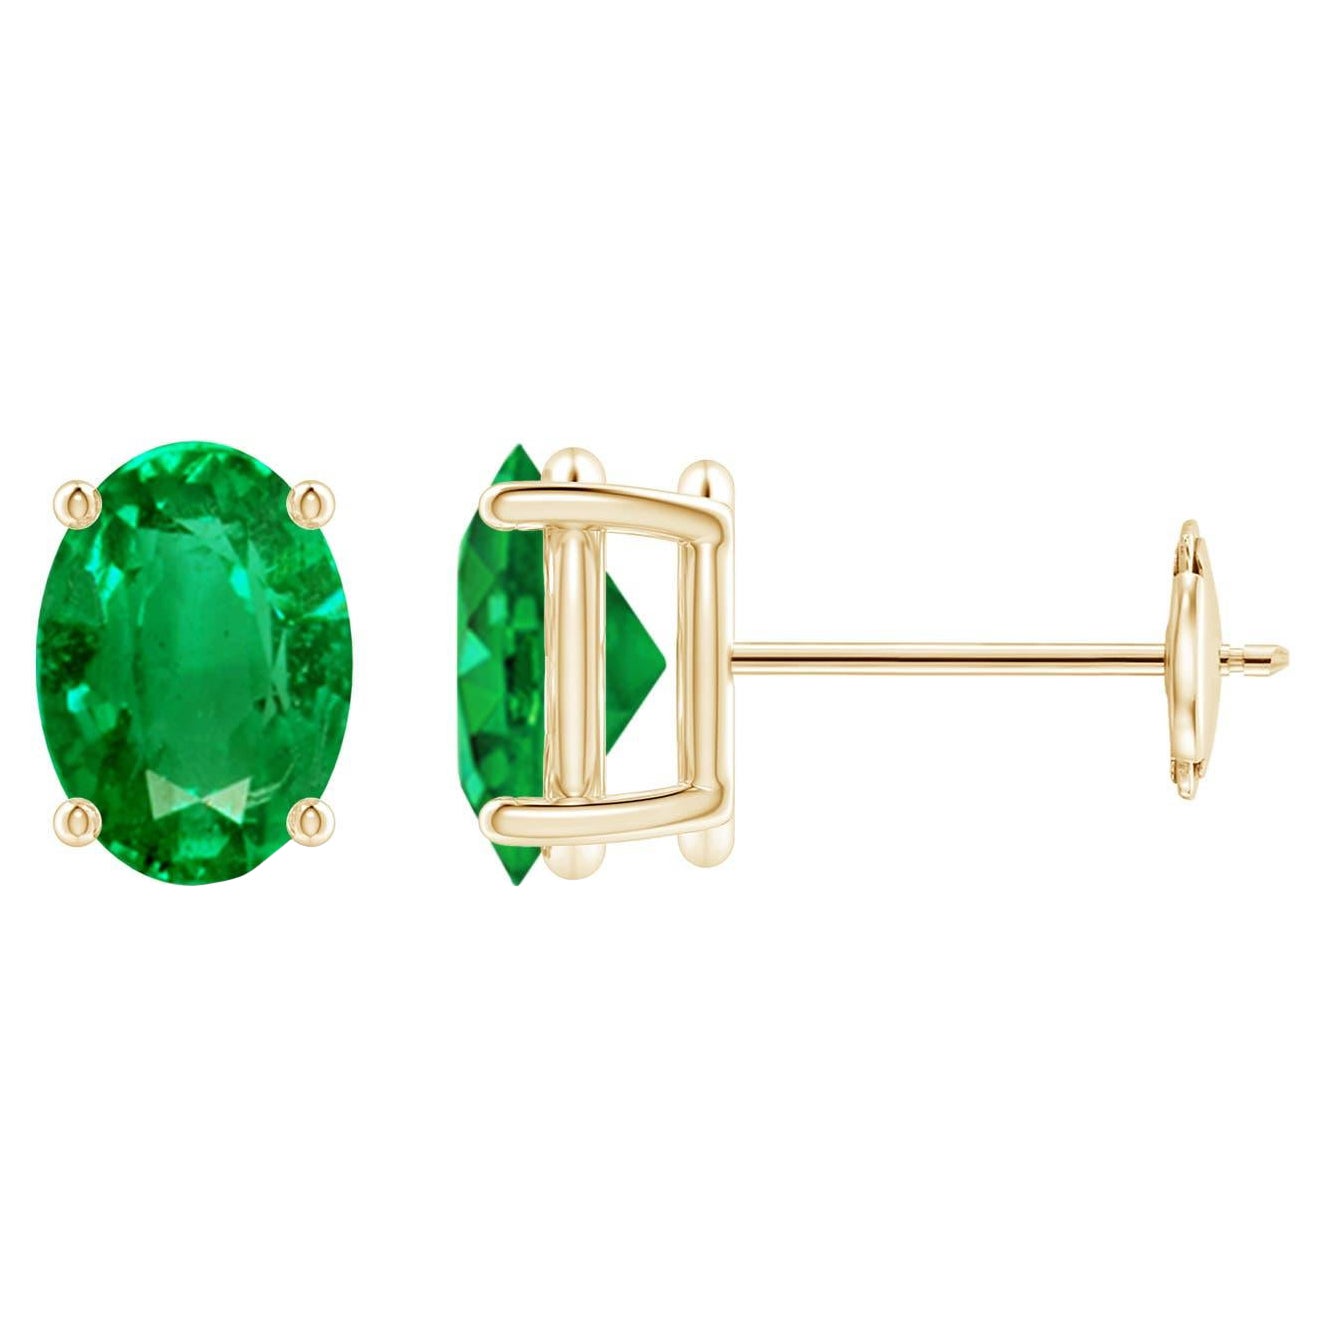 Natural Solitaire Oval 1.32ct Emerald Stud Earrings in 14K Yellow Gold